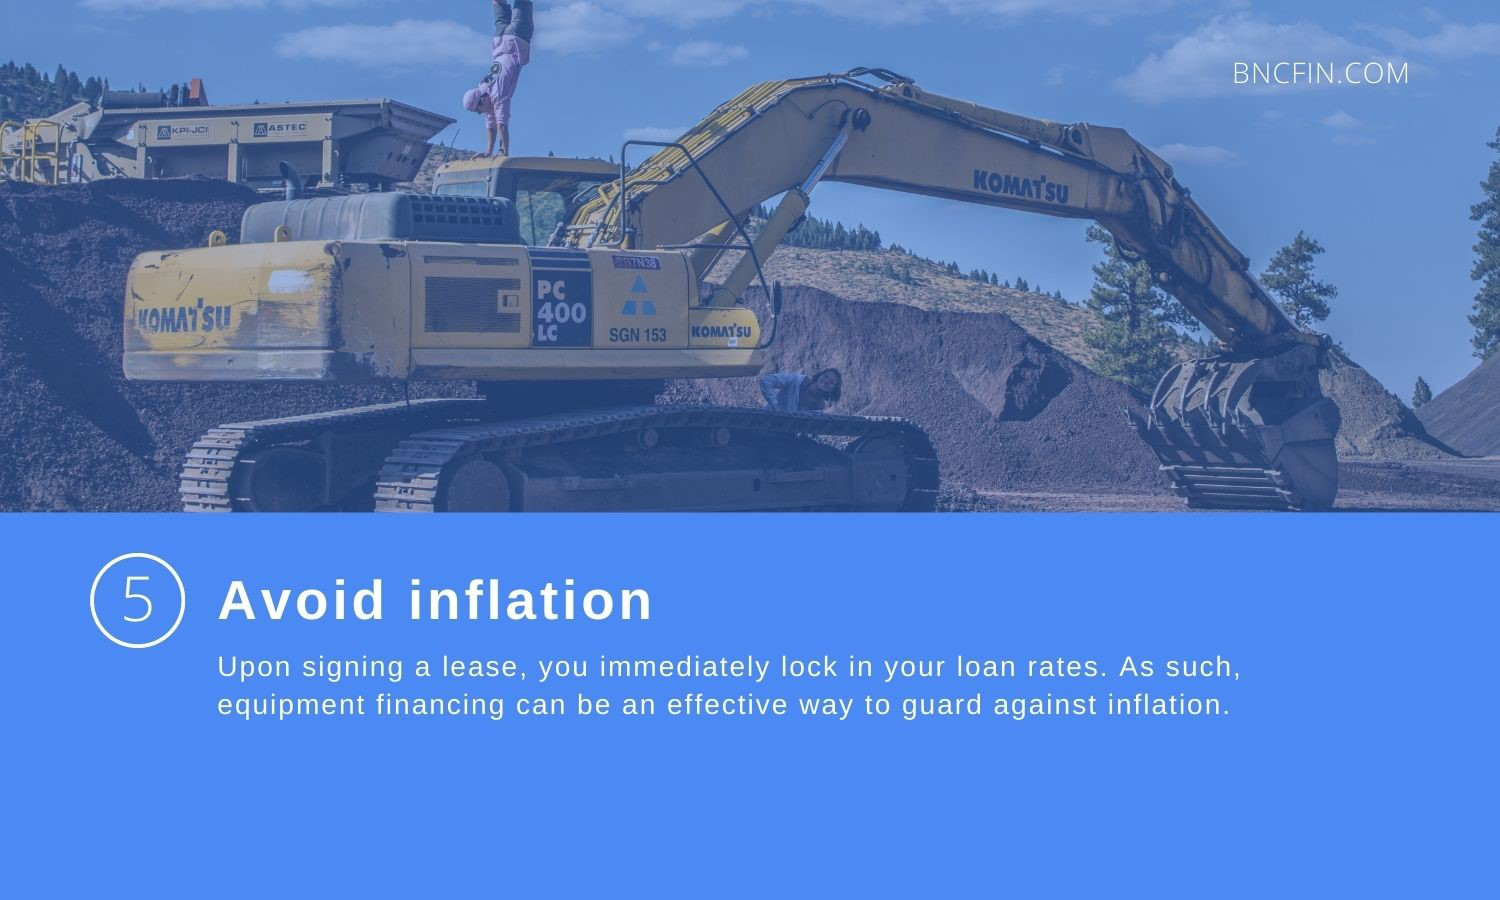 Avoid inflation.